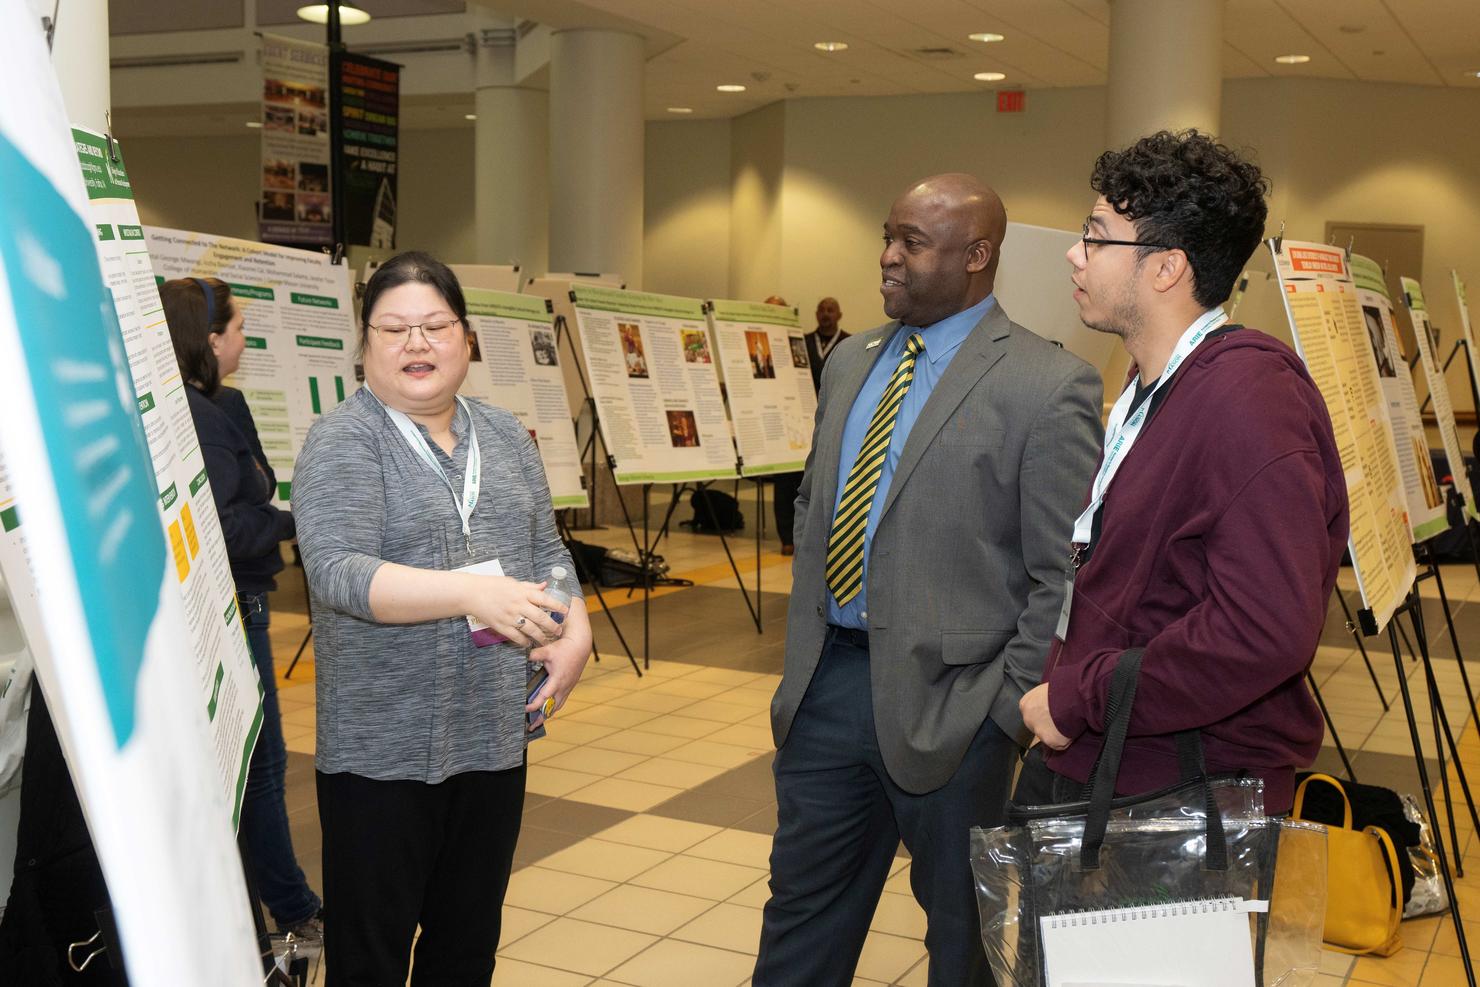 Mason President Gregory Washington visits poster sessions at the ARIE National Conference